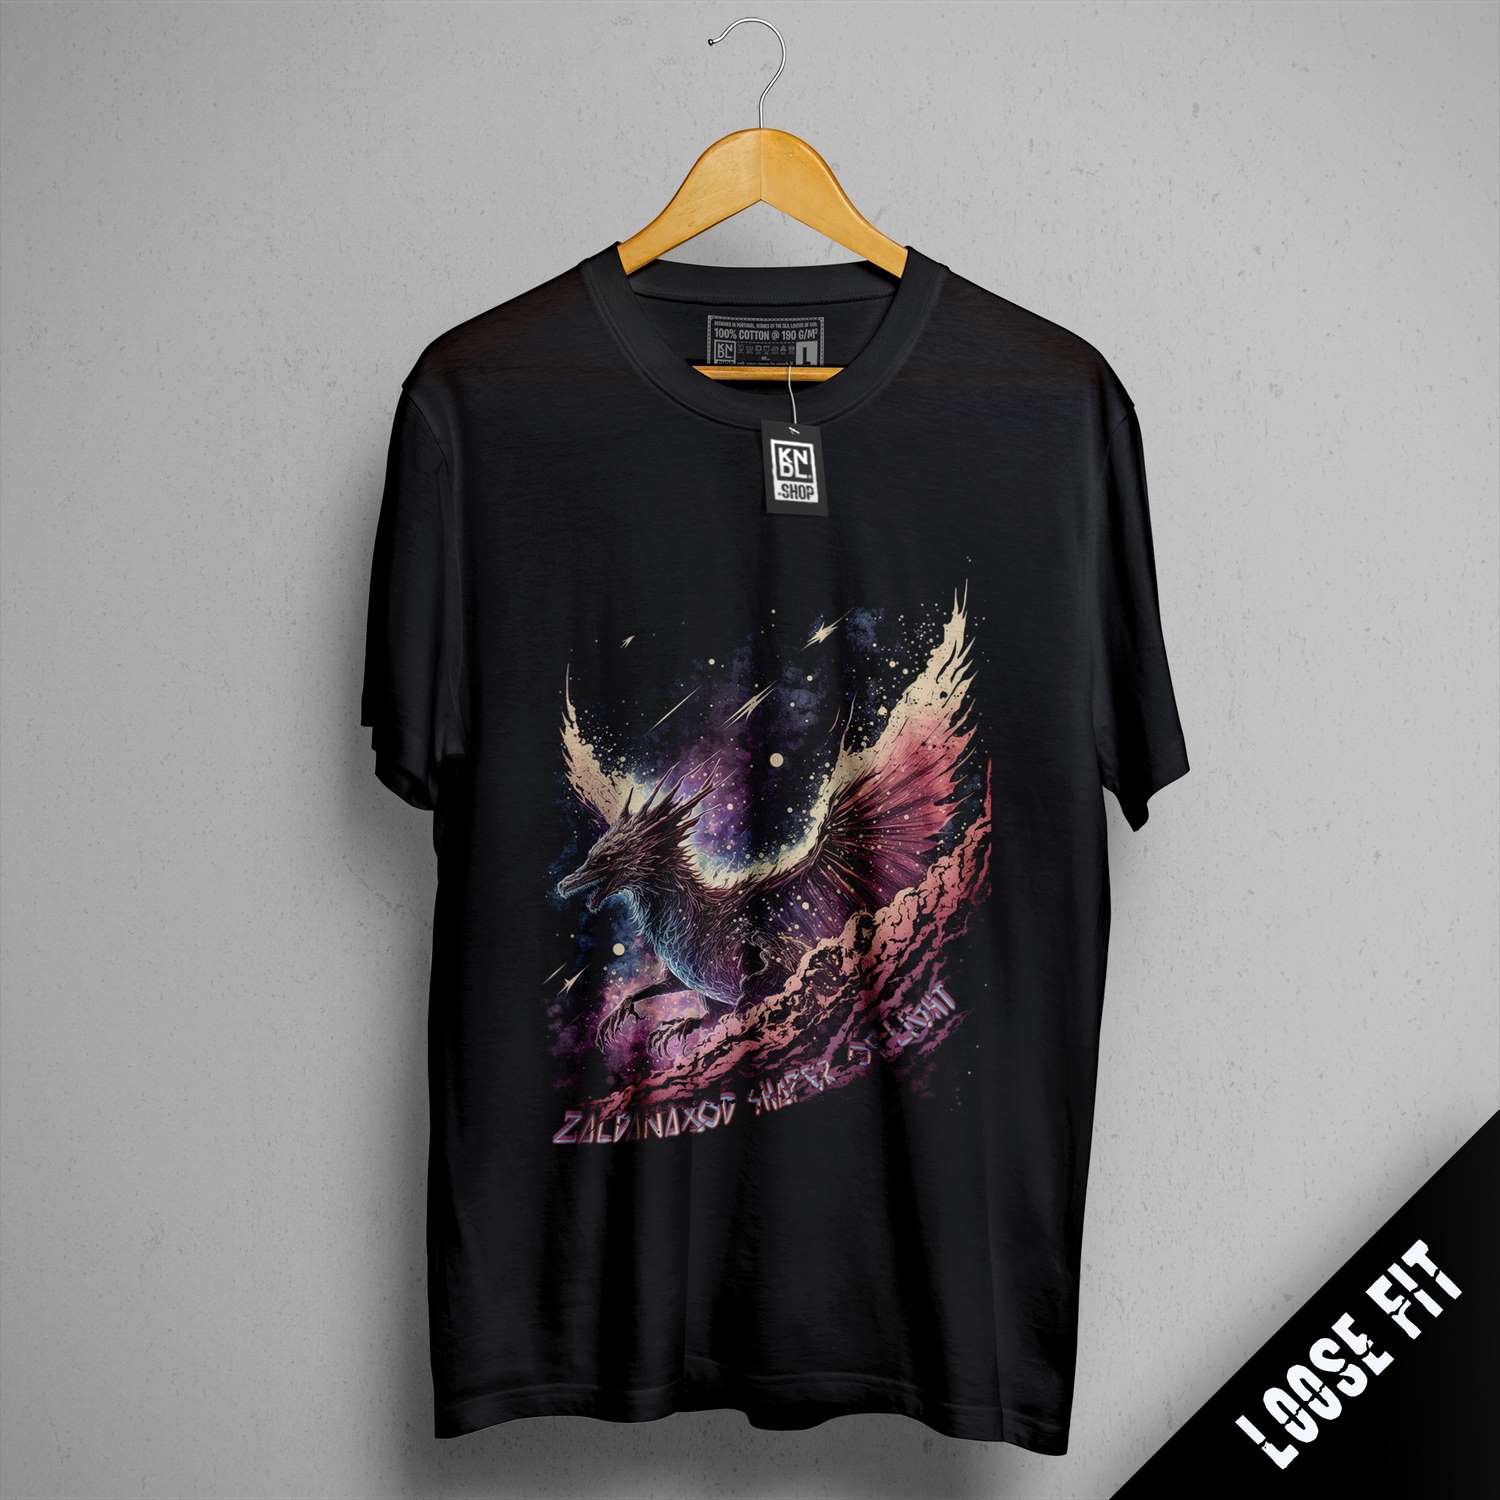 a black t - shirt with a picture of a dragon on it